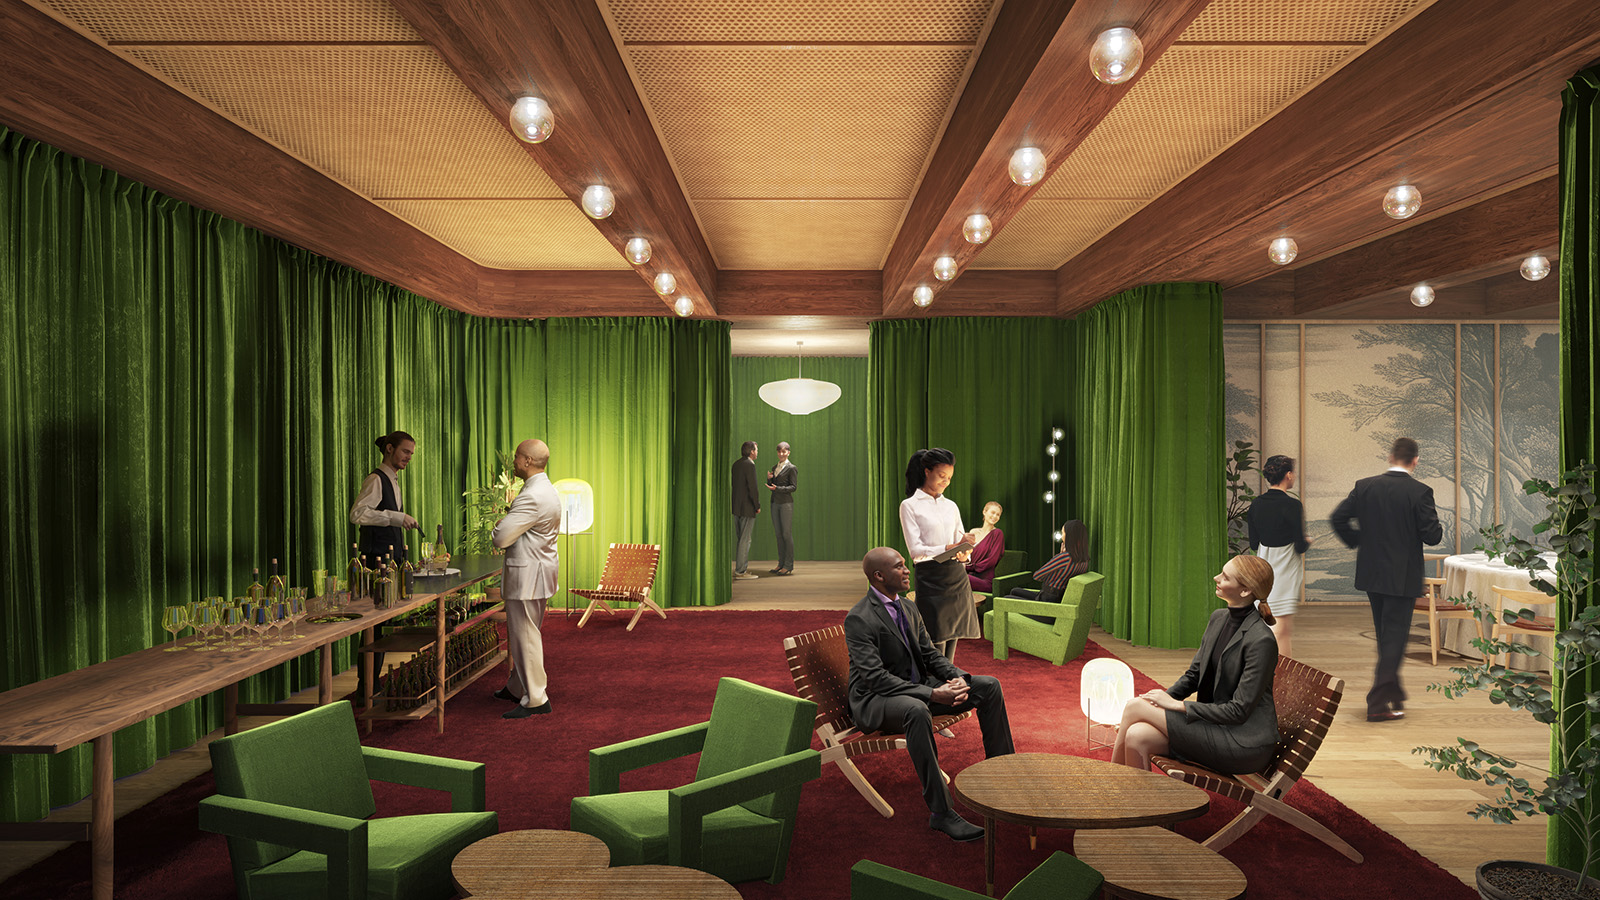 A rendering of an event space with green curtains and a seating area